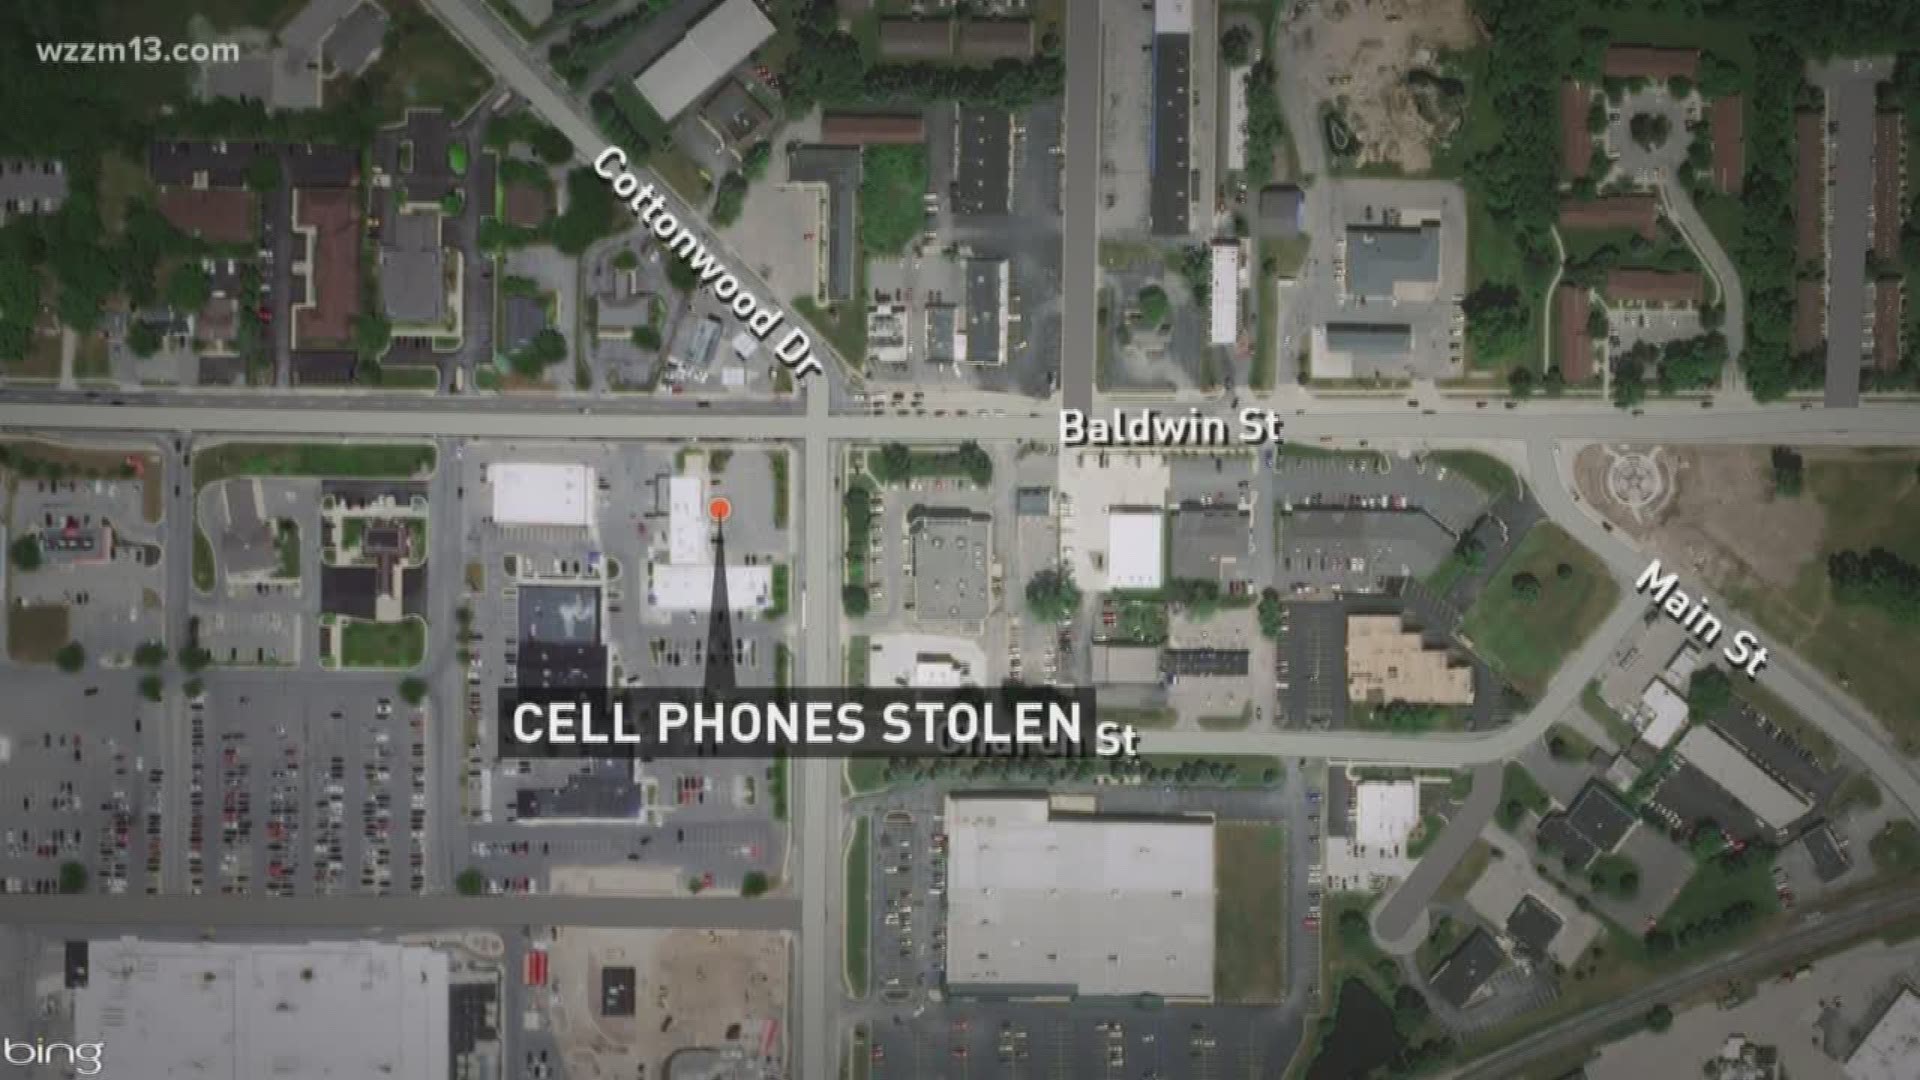 Teens suspected in cell phone thefts